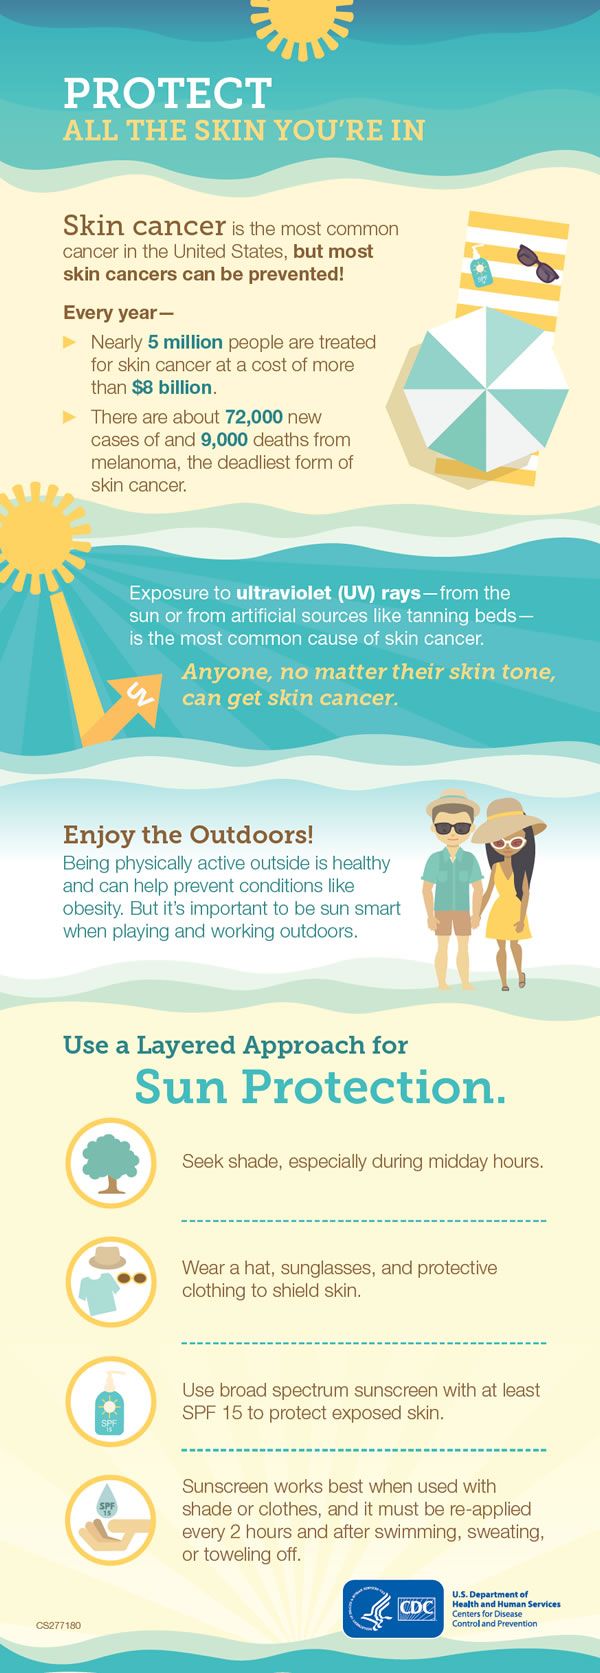 Skin cancer is the most common cancer in the United States, but most skin cancers can be prevented. Use a layered approach for sun protection. Blog Infographic, High Blood Pressure Recipes, Blood Pressure Range, Low Sodium Recipes Blood Pressure, Medical Photography, Blood Pressure Numbers, Blood Pressure Symptoms, Blood Pressure Food, Blood Pressure Chart